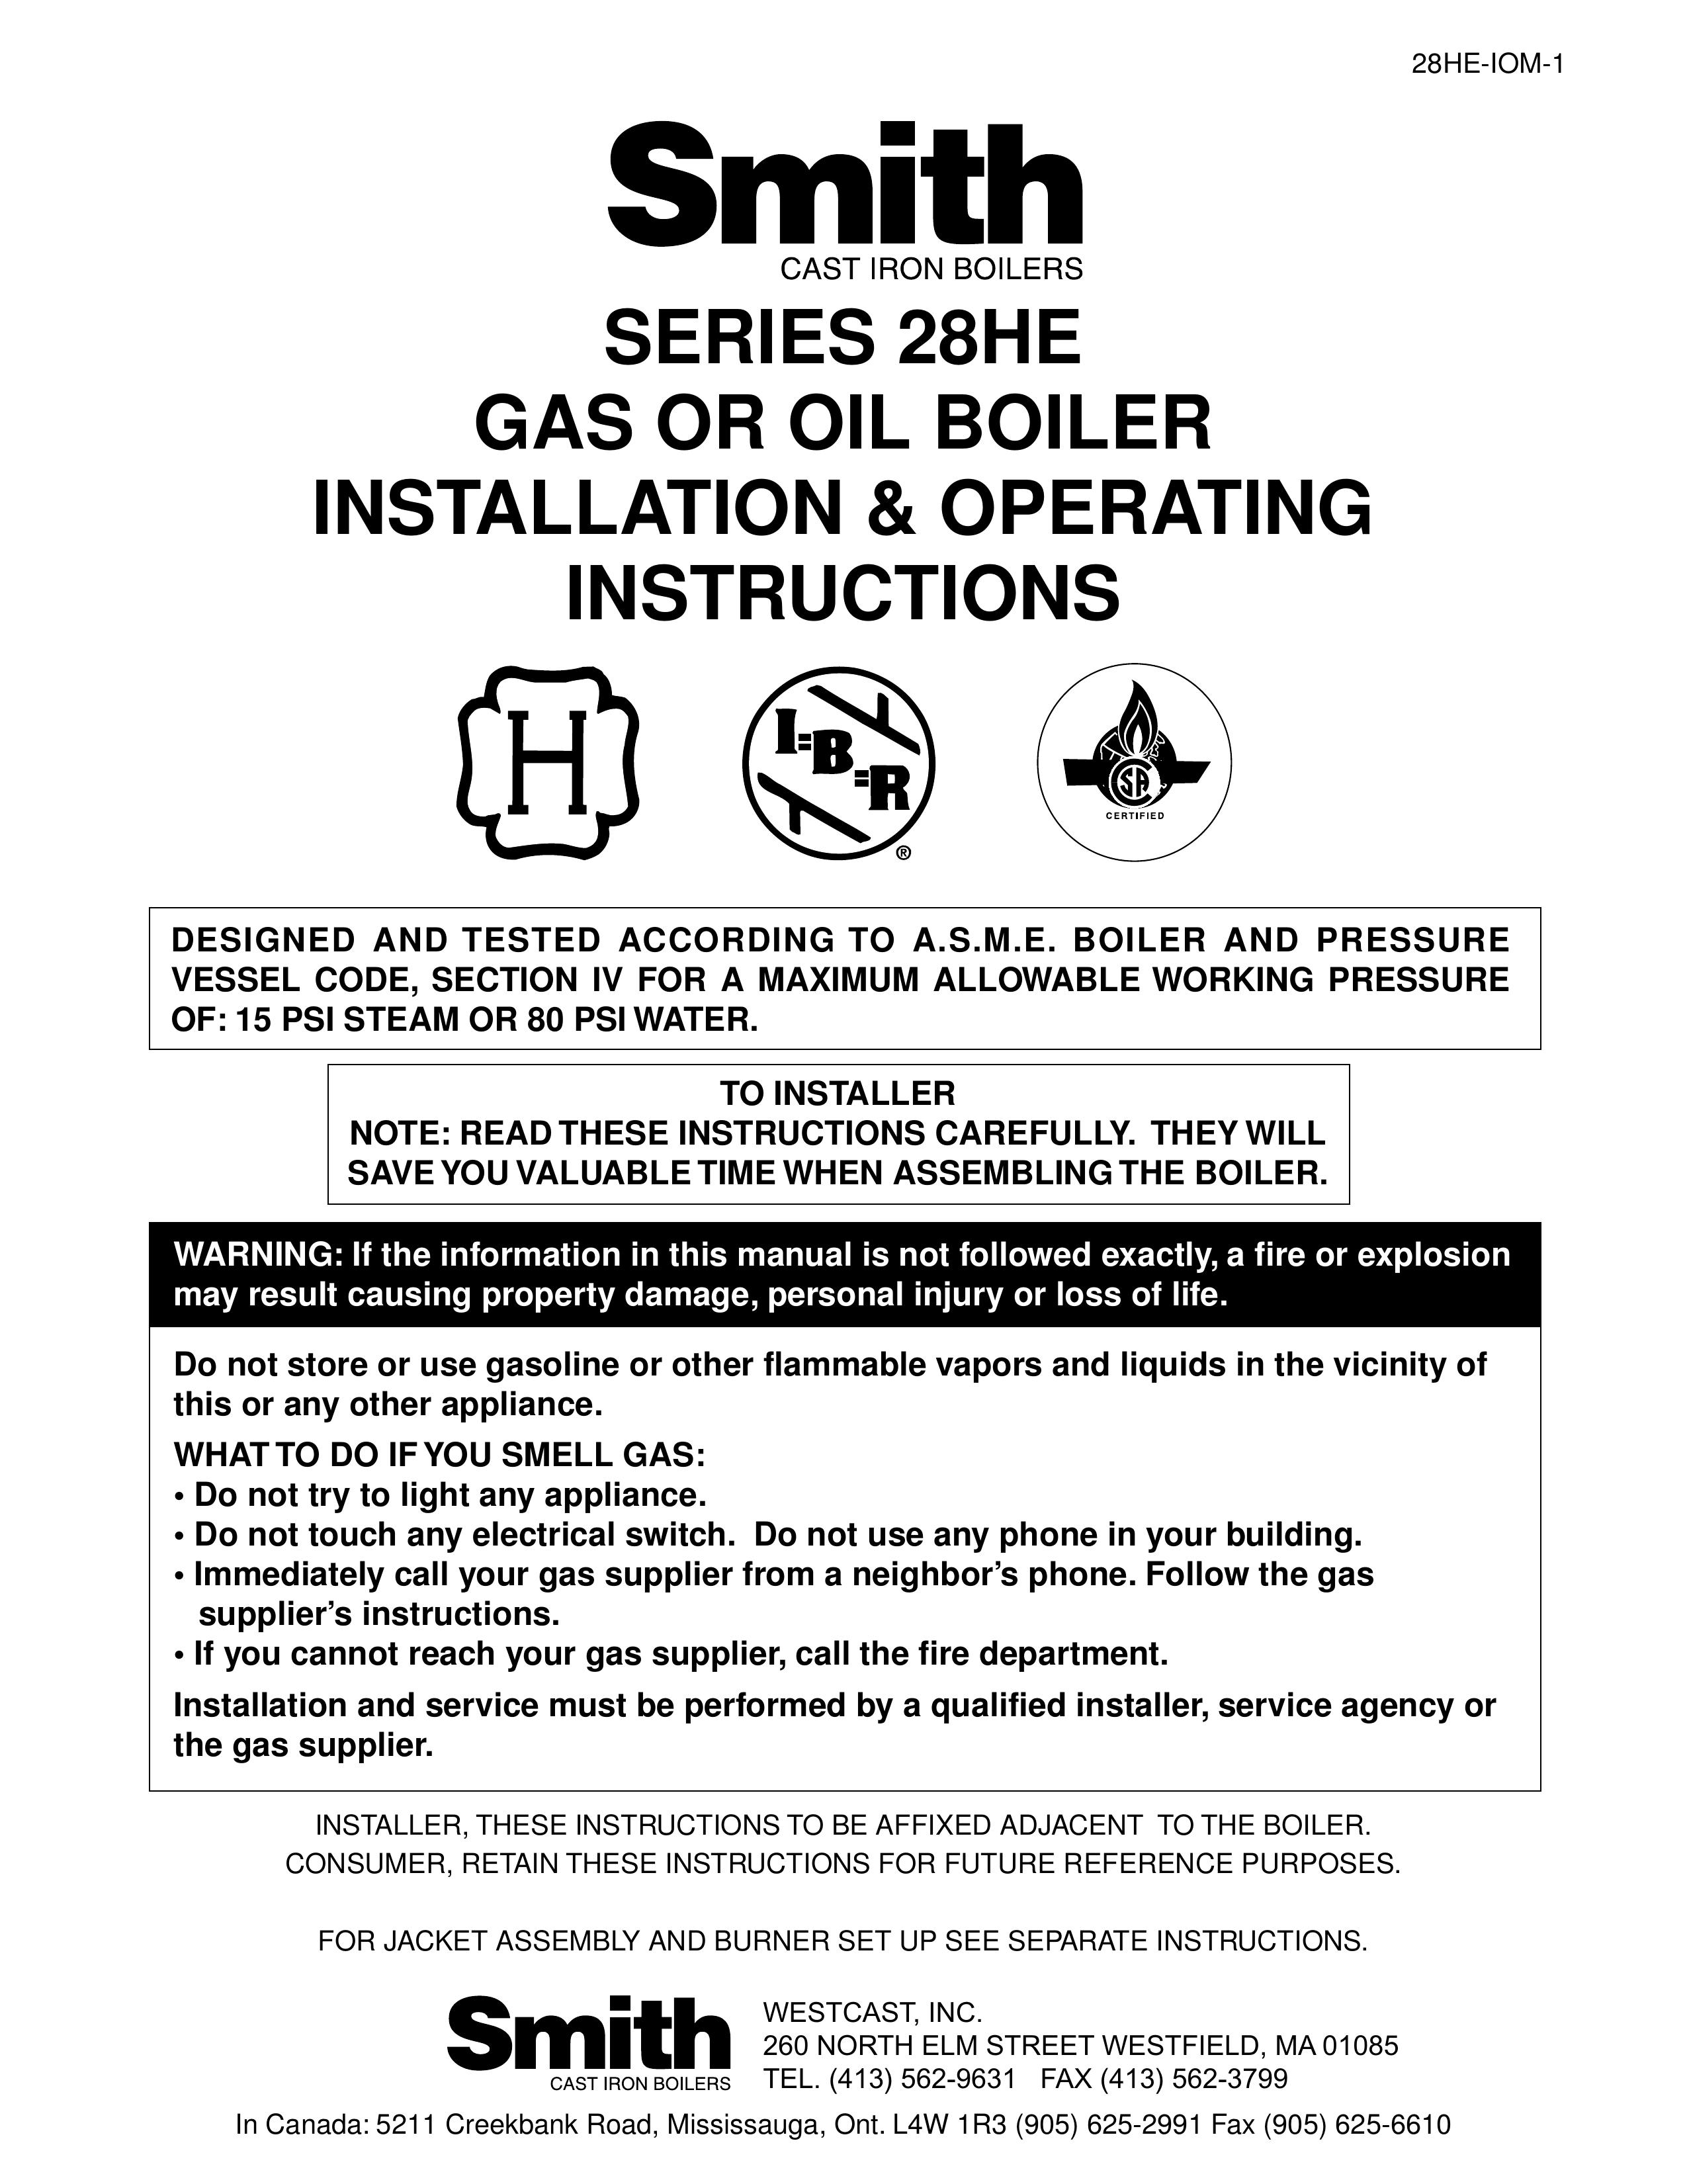 Smith Cast Iron Boilers 28HE Blower User Manual